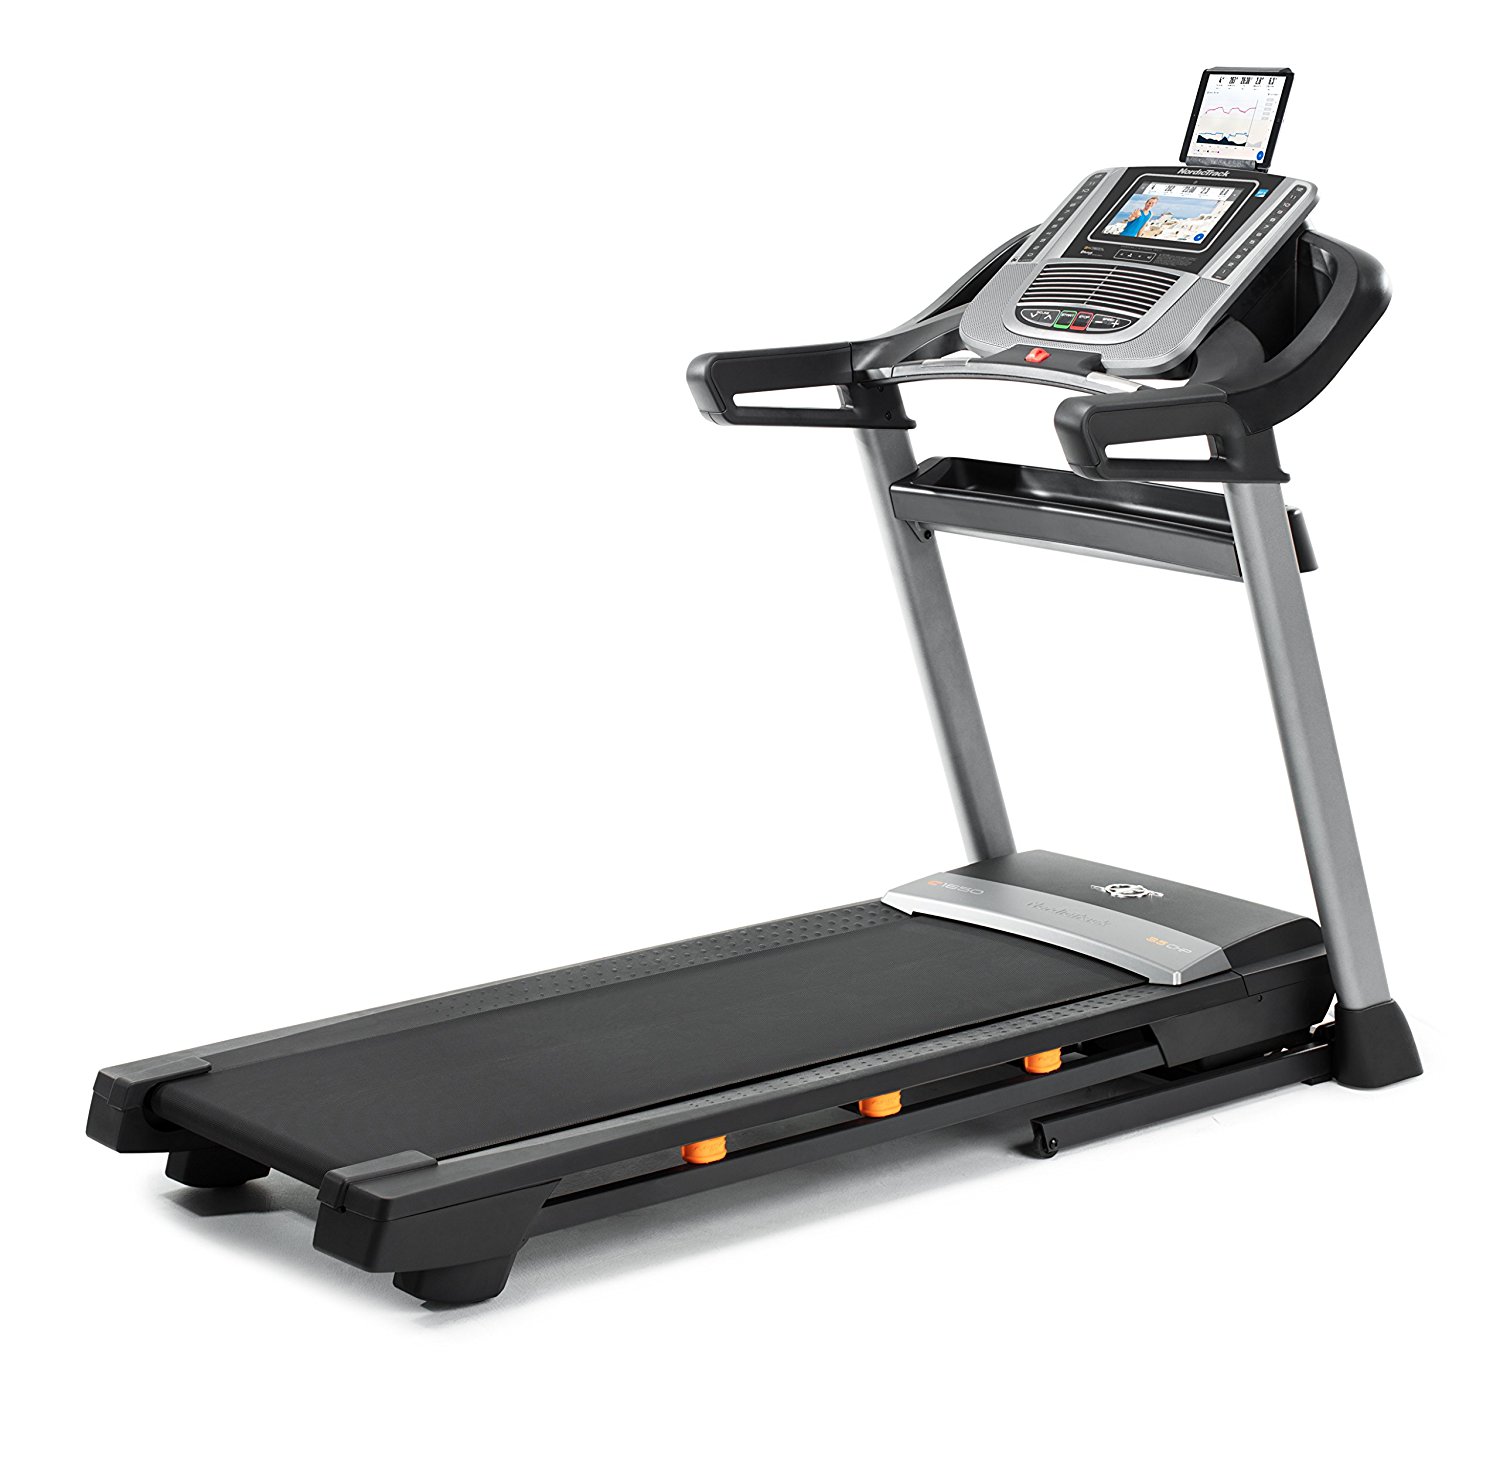 Top Rated Treadmills For Your Home Gym